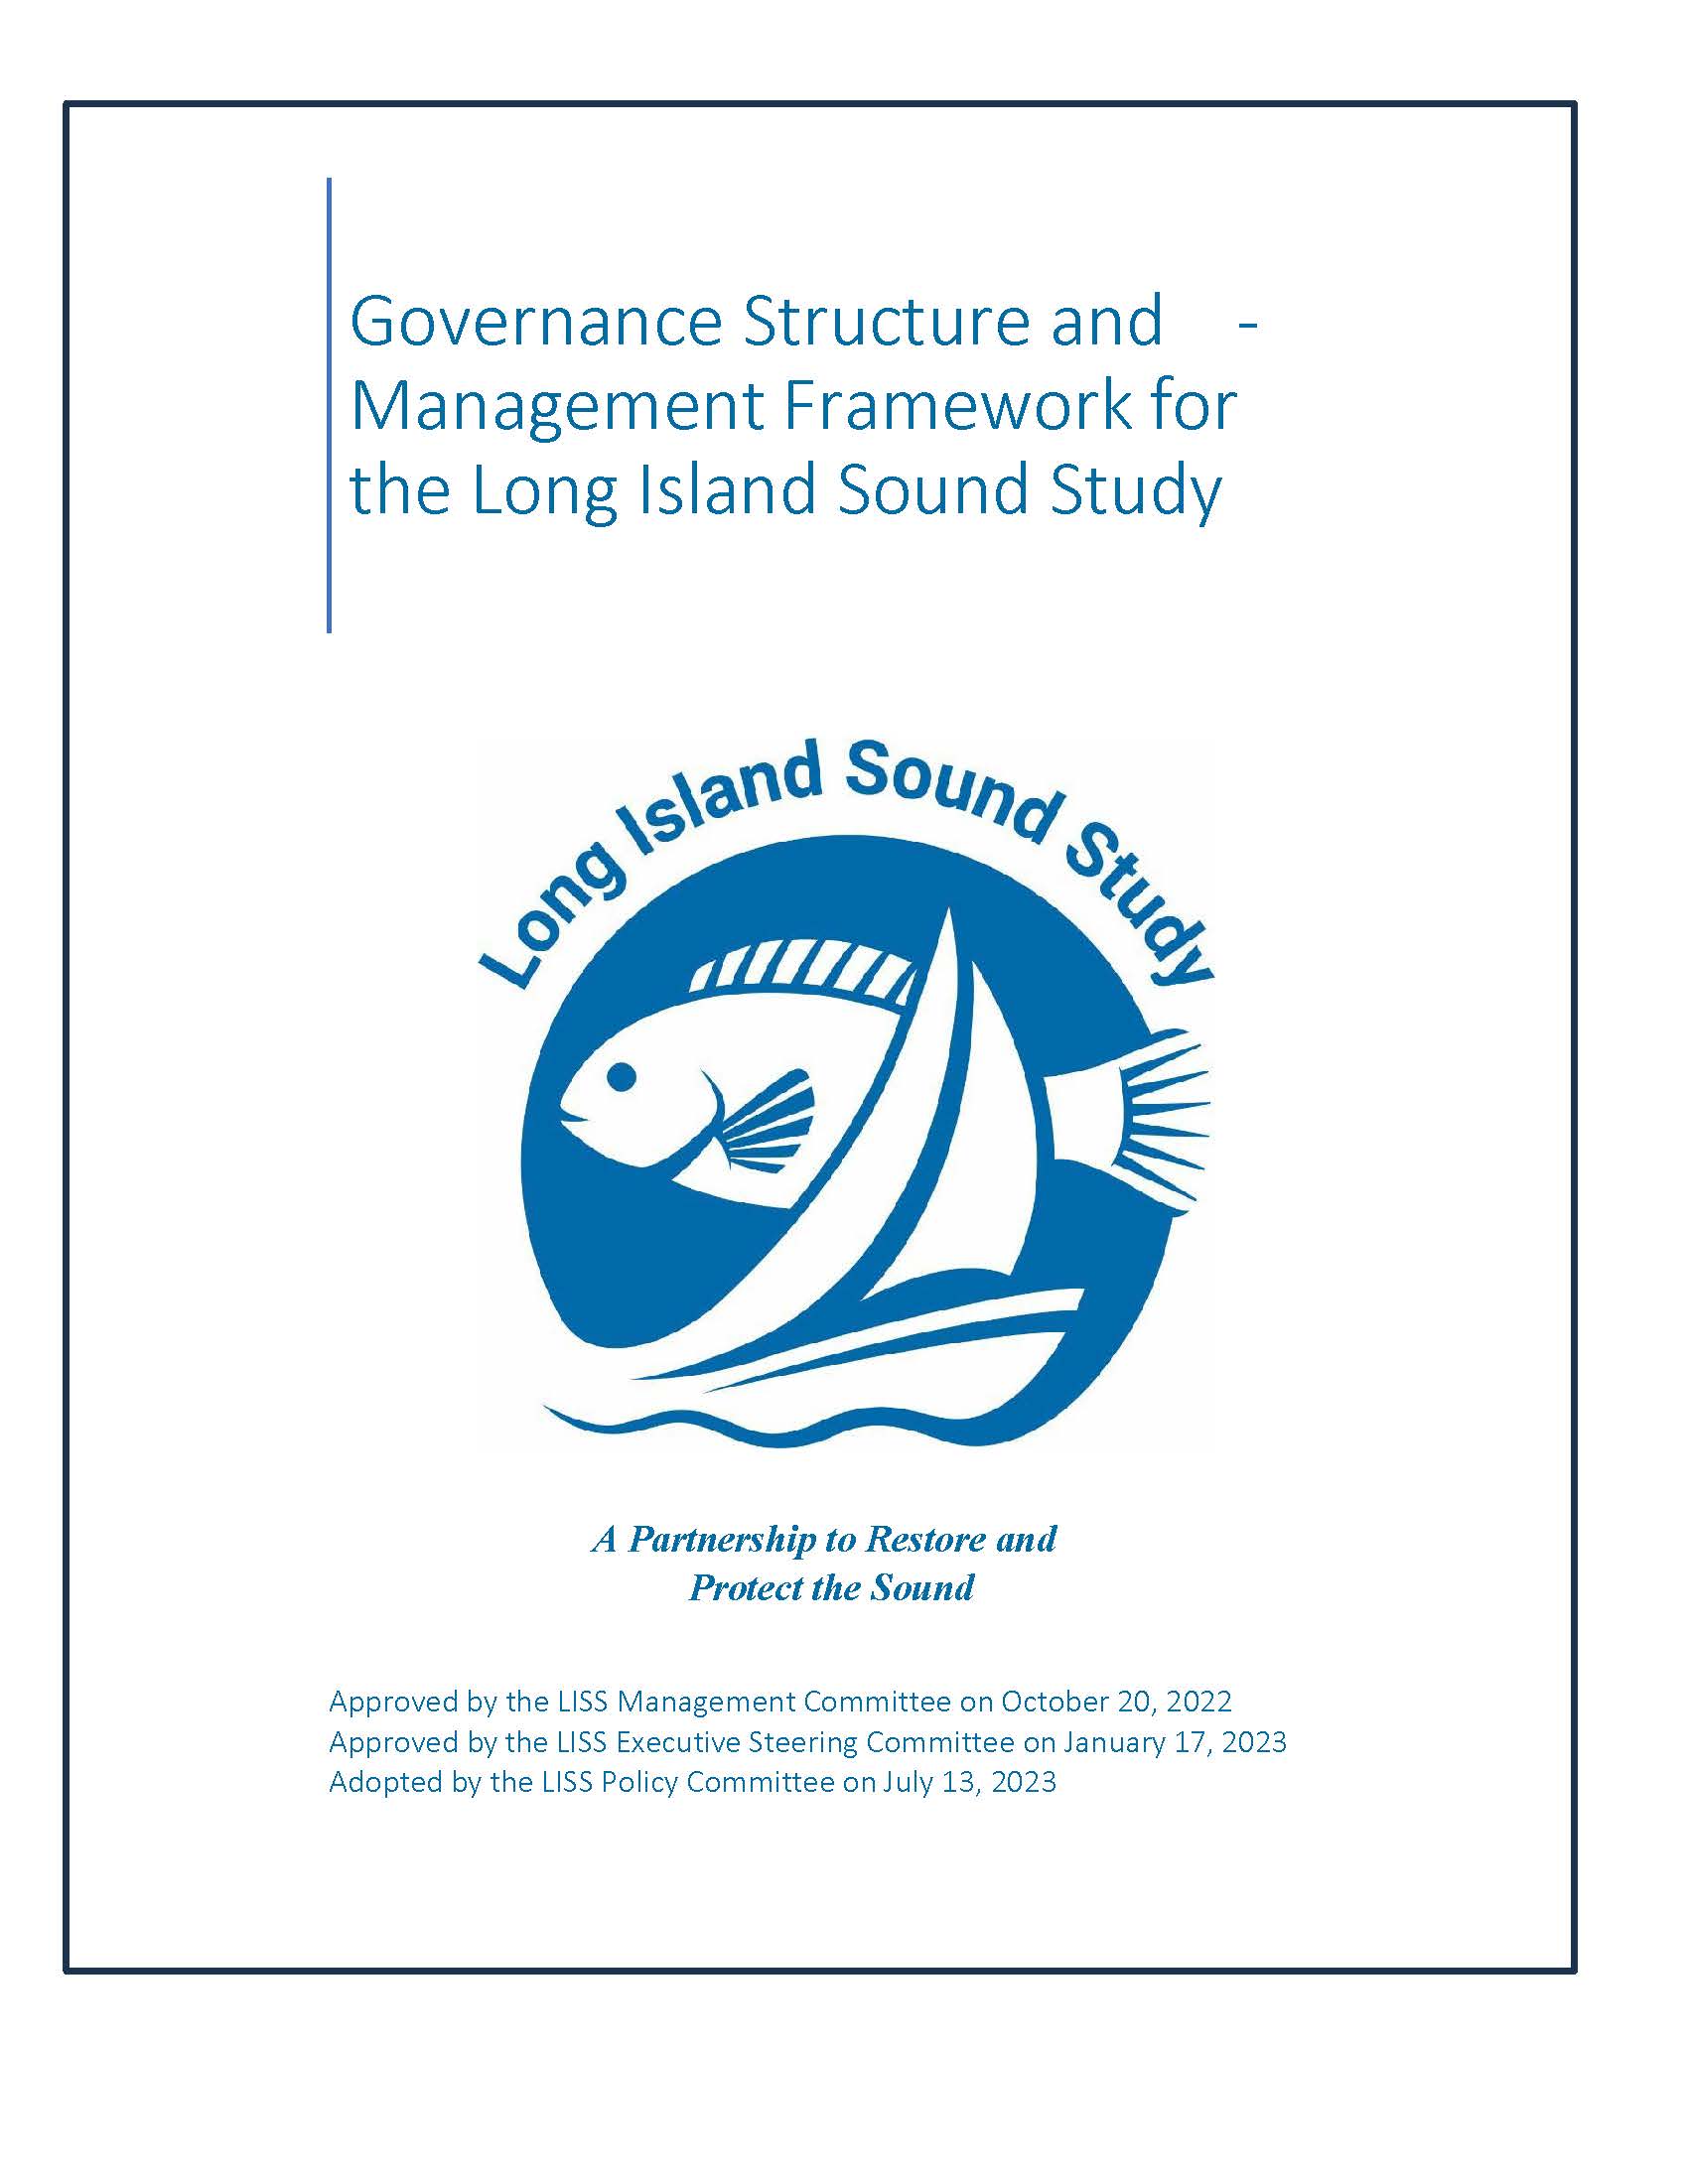 This image is the cover for the document titled: "Governance Structure and Management Framework for the Long Island Sound Study."